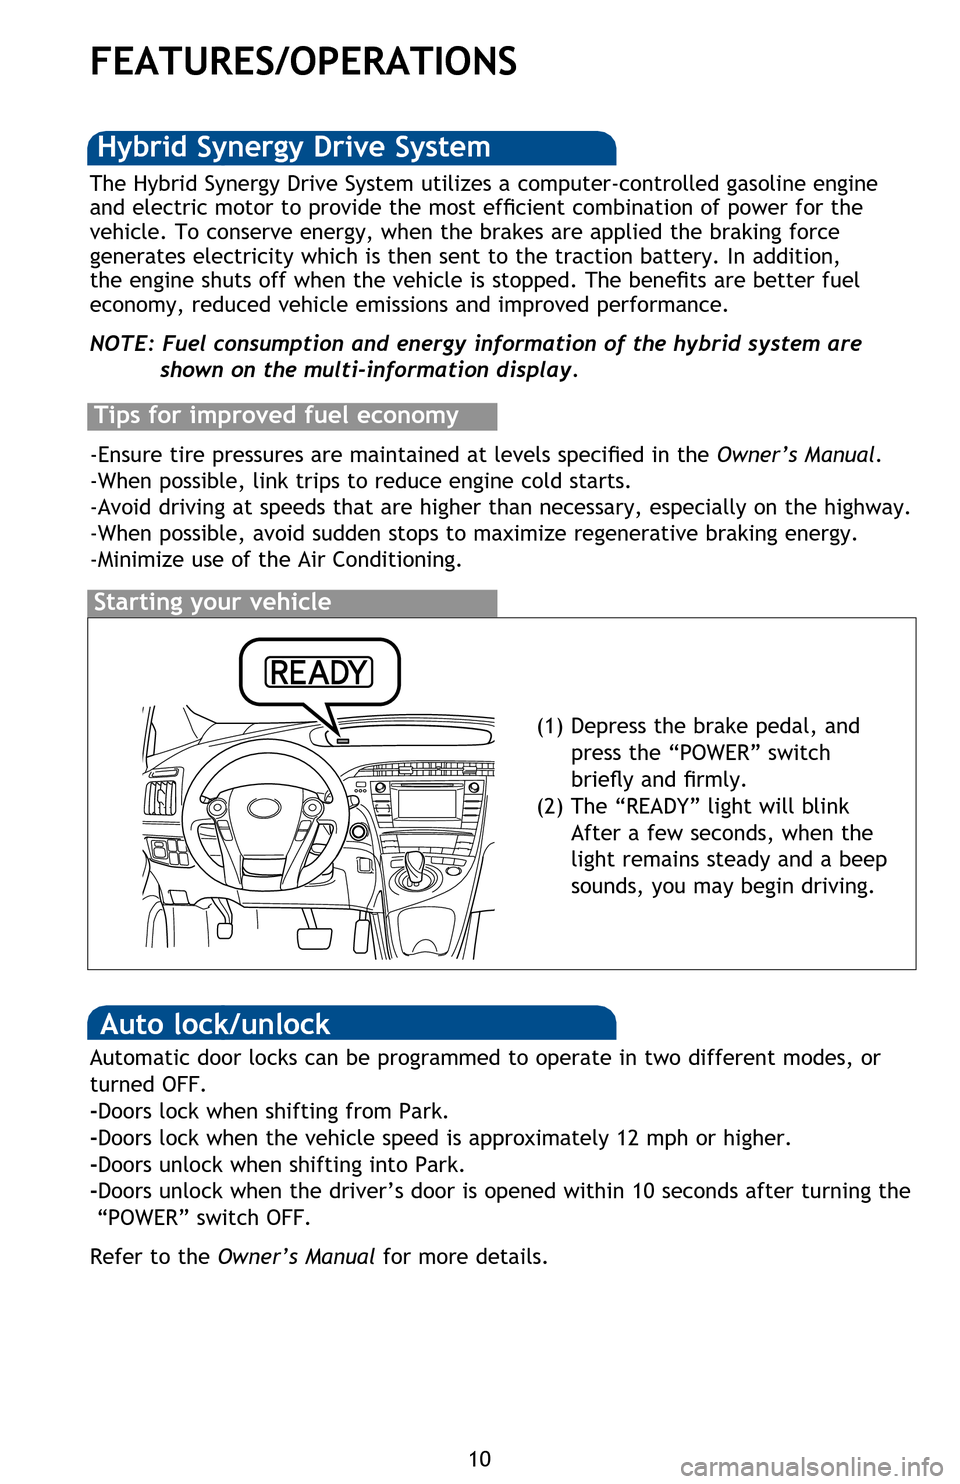 TOYOTA PRIUS 2013 3.G Quick Reference Guide 10
FEATURES/OPERATIONS
Transmission
* The engine brake is the equivalent of downshifting. Shift to “B” when engine 
braking is desired (i.e. downhill driving, coasting to a stop, etc.).
ECO Mode
E